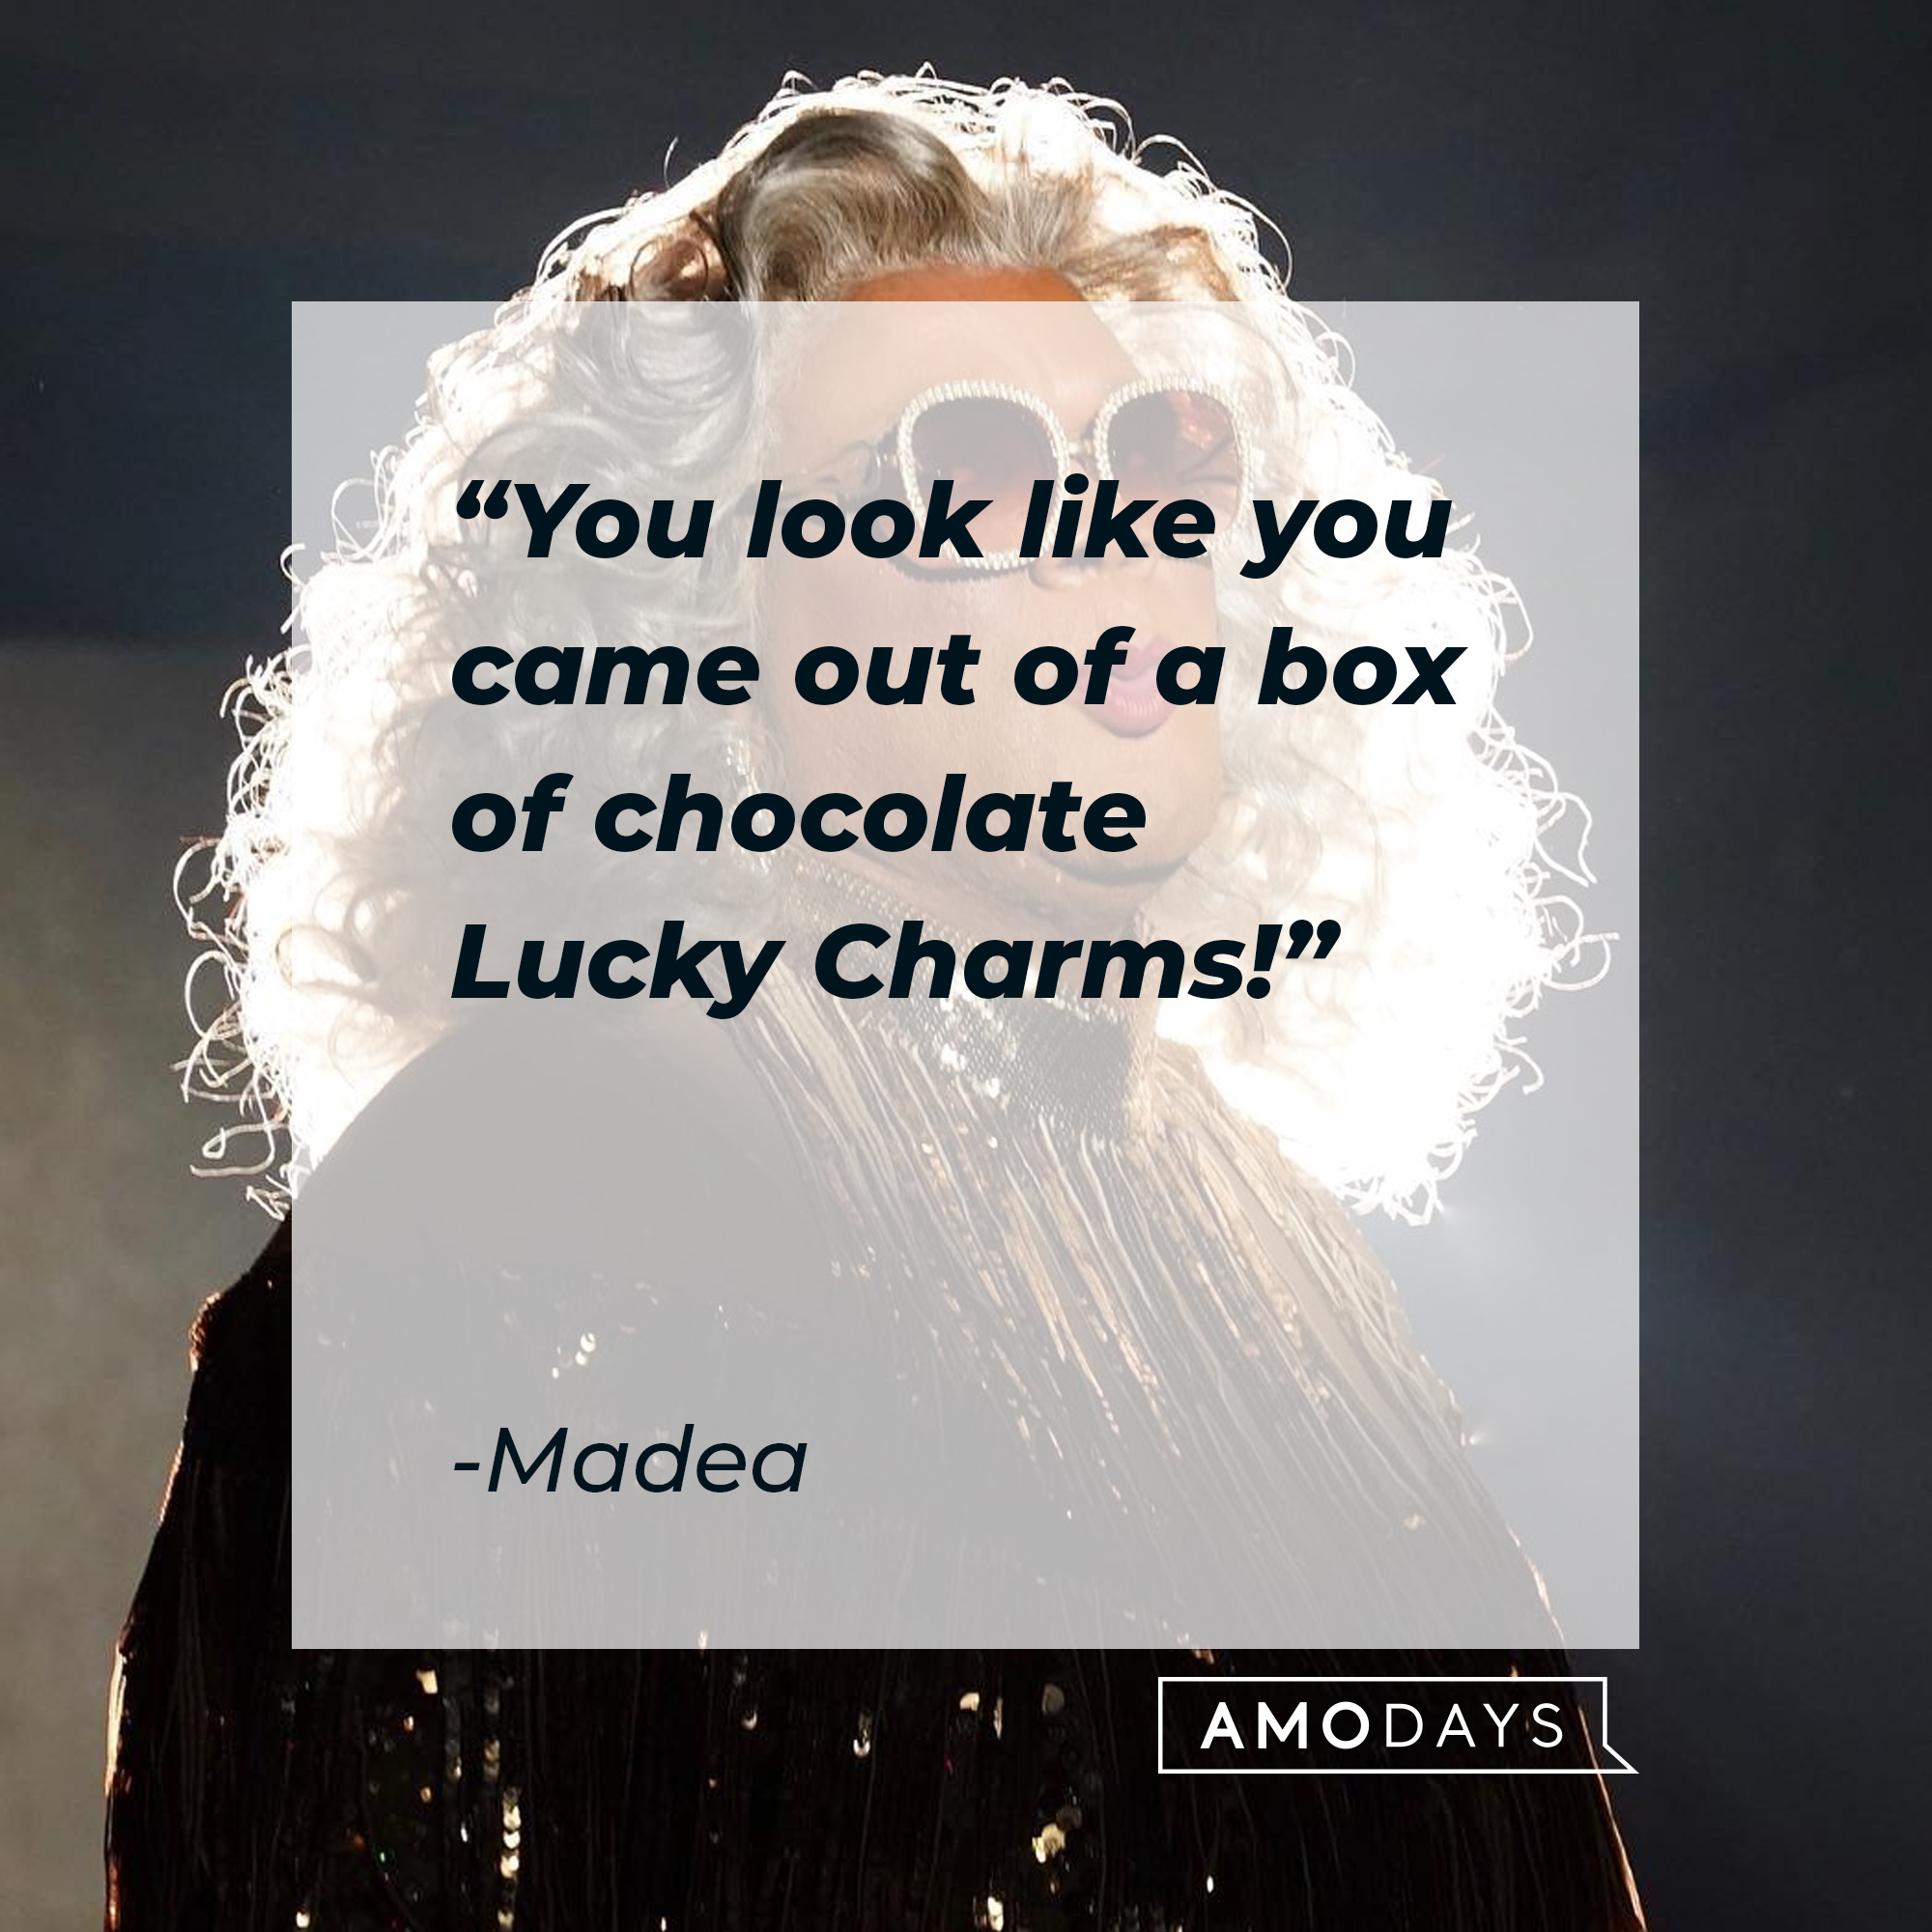 Madea's quote: "You look like you came out of a box of chocolate Lucky Charms!" | Source: Facebook.com/madea